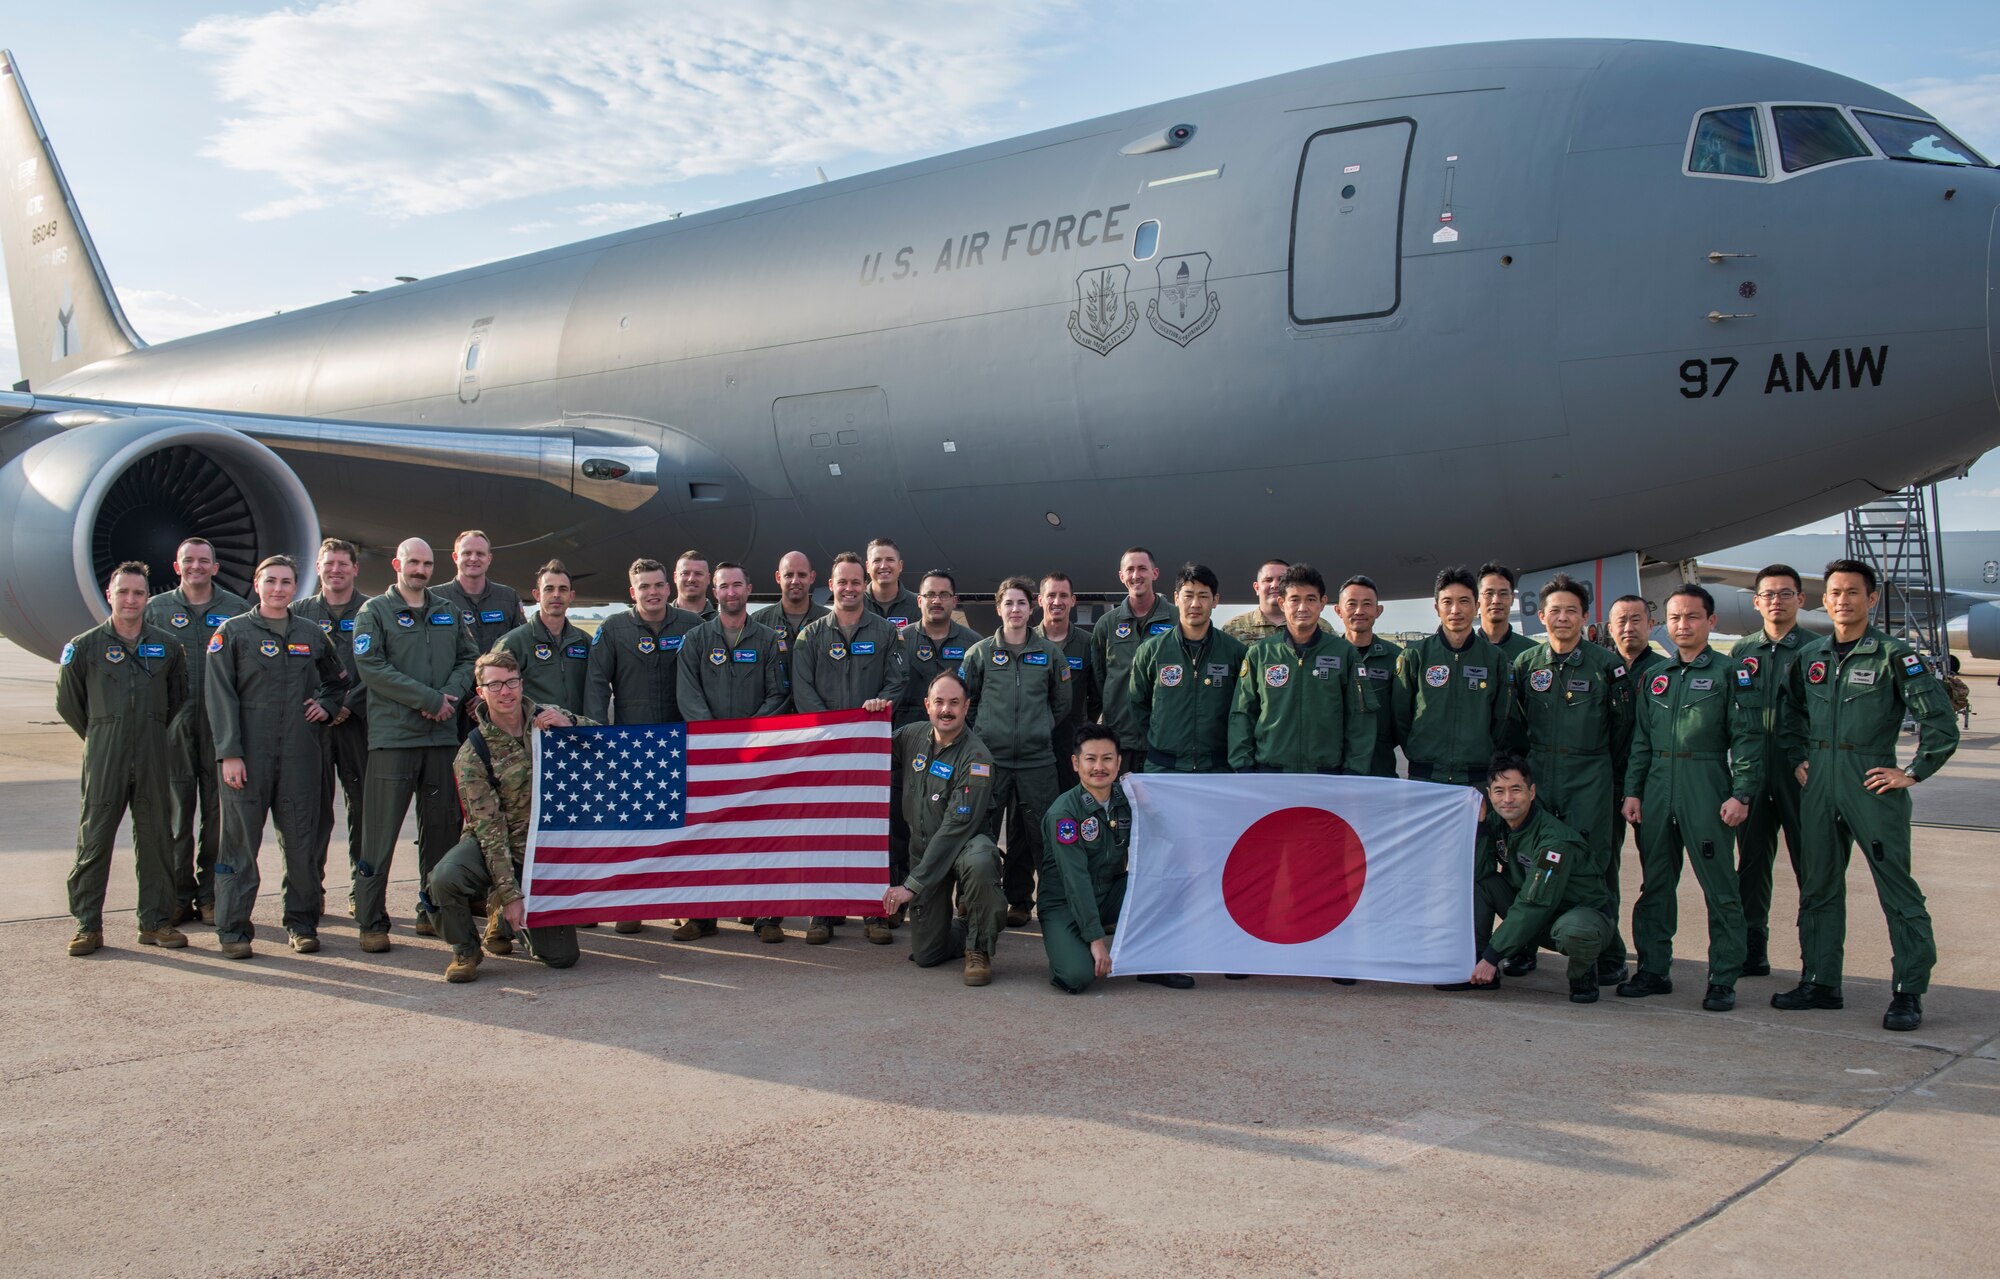 U.S. Air Force Airmen from the 56th Air Refueling Squadron and Japanese aircrew students pose for a photo in front of a KC-46 Pegasus, May 12, 2021, at Altus Air Force Base, Oklahoma. The students are the first U.S. allies to train on the KC-46. (U.S. Air Force photo by Airman 1st Class Amanda Lovelace)